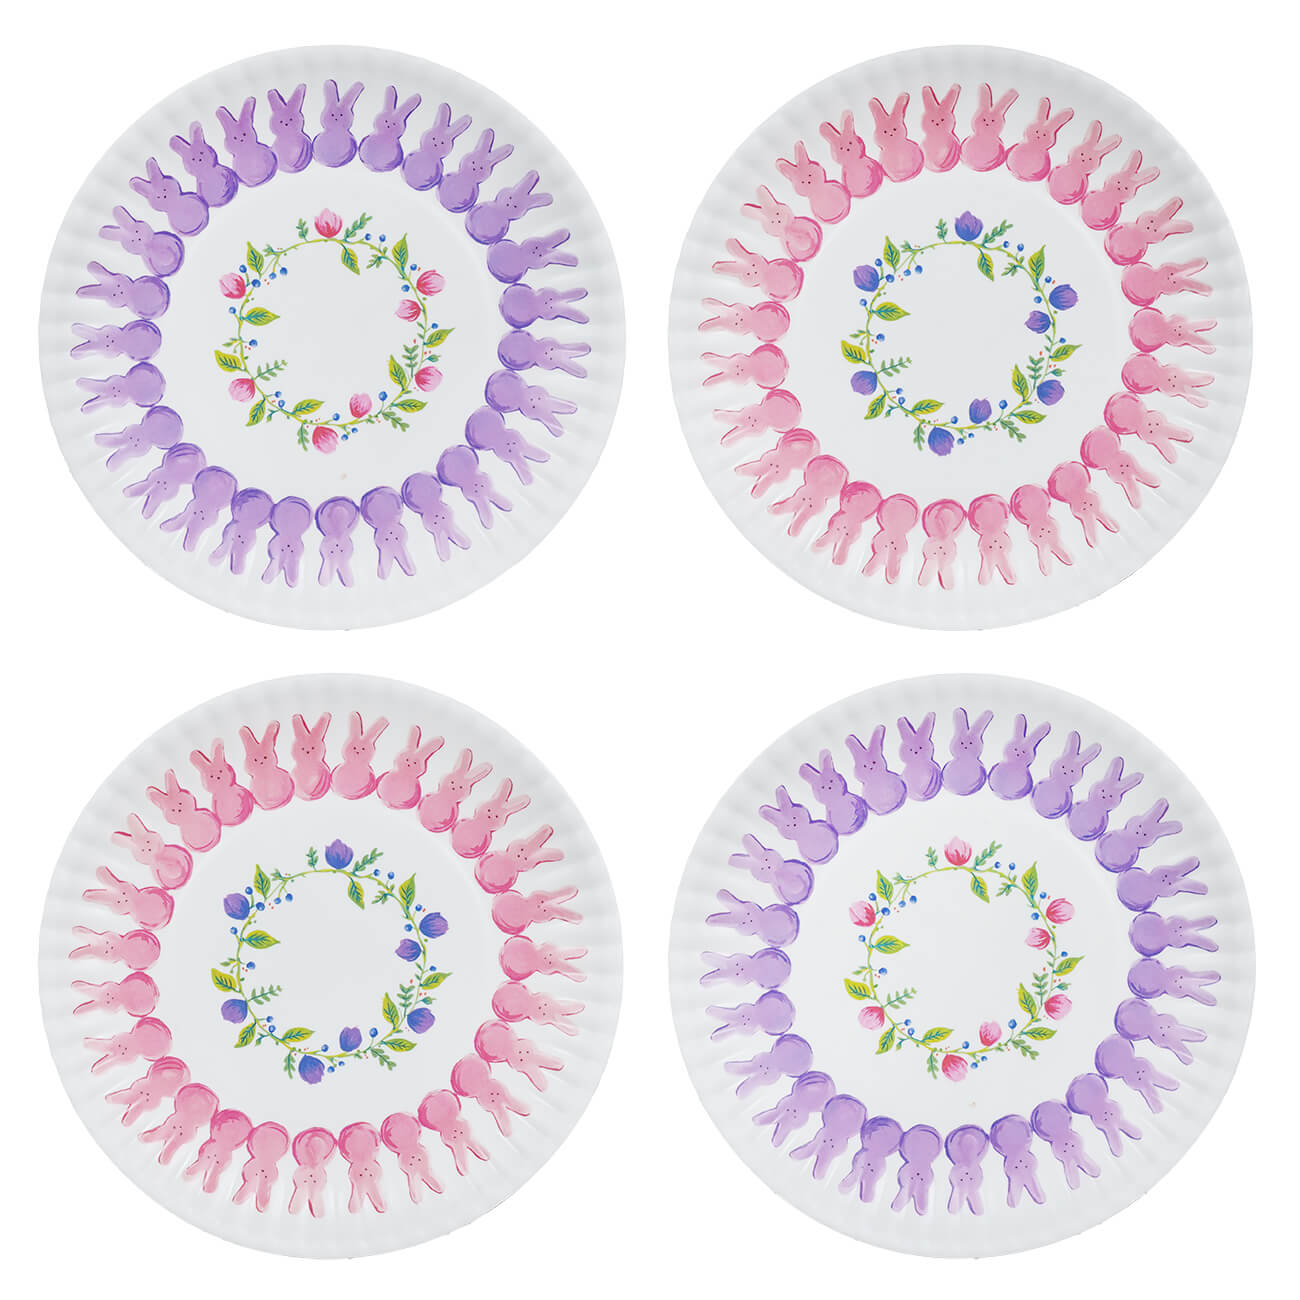 Pink & Purple Bunny Peeps Easter Melamine "Paper" Plate With Floral Pattern Set/4